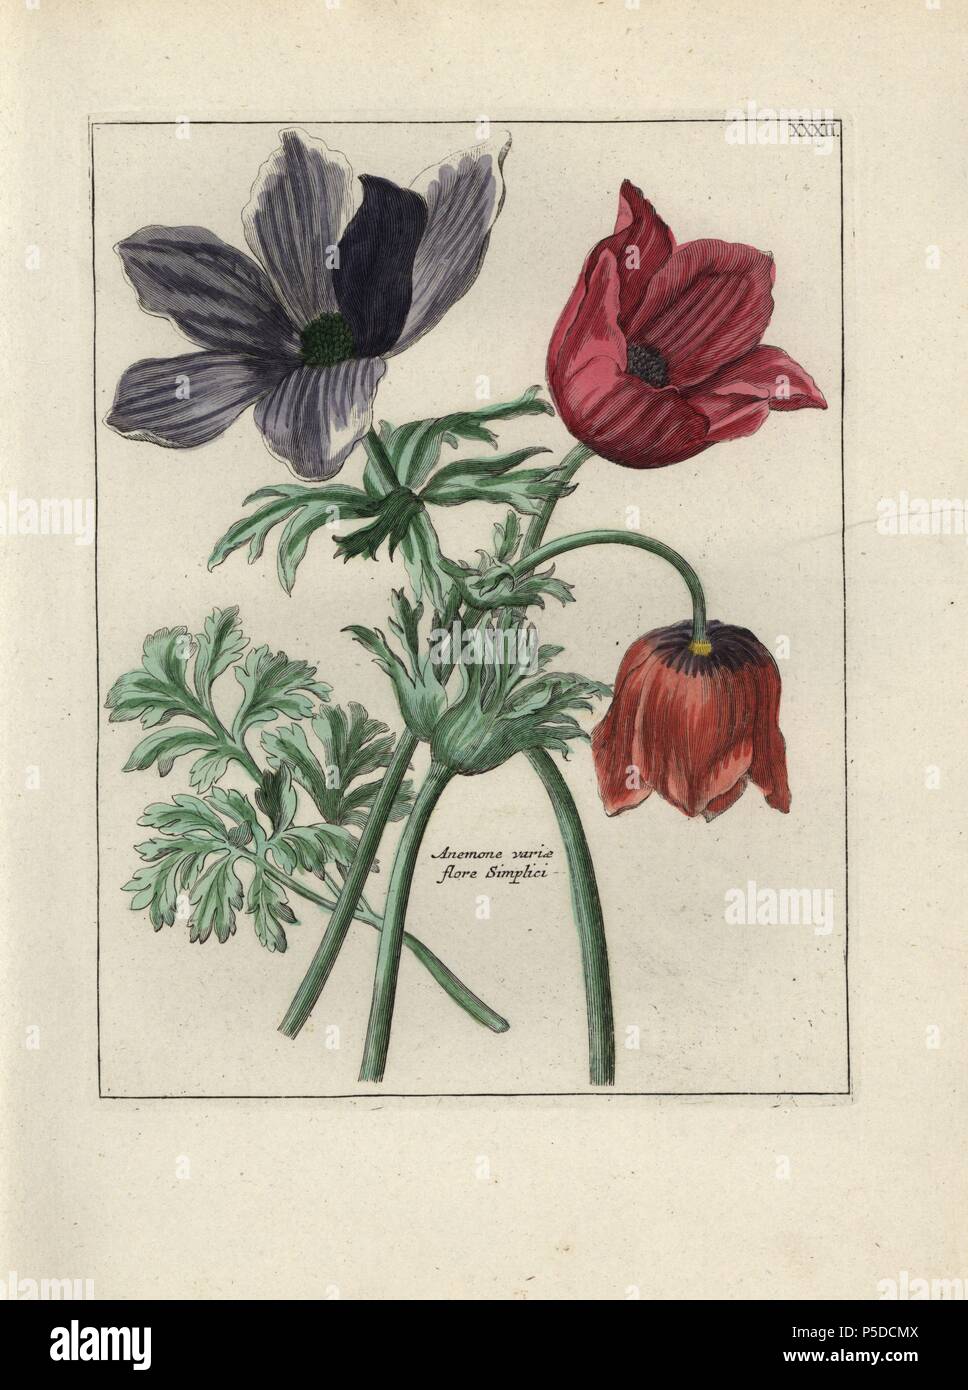 Anemone varieties, Anemone varie flore simplici, and leaves. Handcoloured copperplate botanical engraving from 'Nederlandsch Bloemwerk' (Dutch Flower Arrangements), Amsterdam, J.B. Elwe, 1794. Illustration copied from a work by one of the outstanding French flower painters of the 17th century, Nicolas Robert (1614-1685), entitled 'Variae ac multiformes florum species... Diverses fleurs,' Paris, 1660. Stock Photo